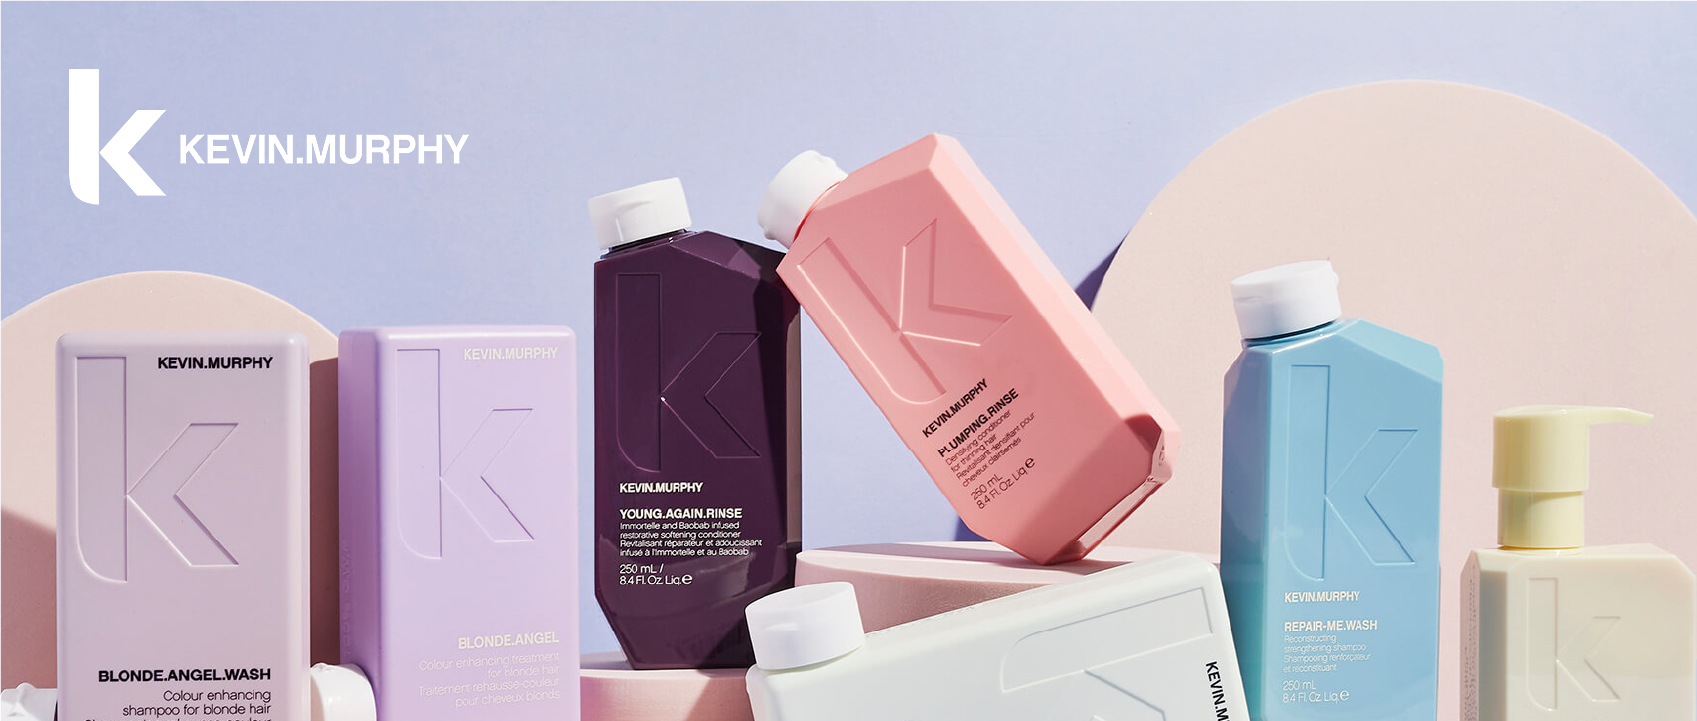 TOUCHABLE – KEVIN MURPHY STYLING